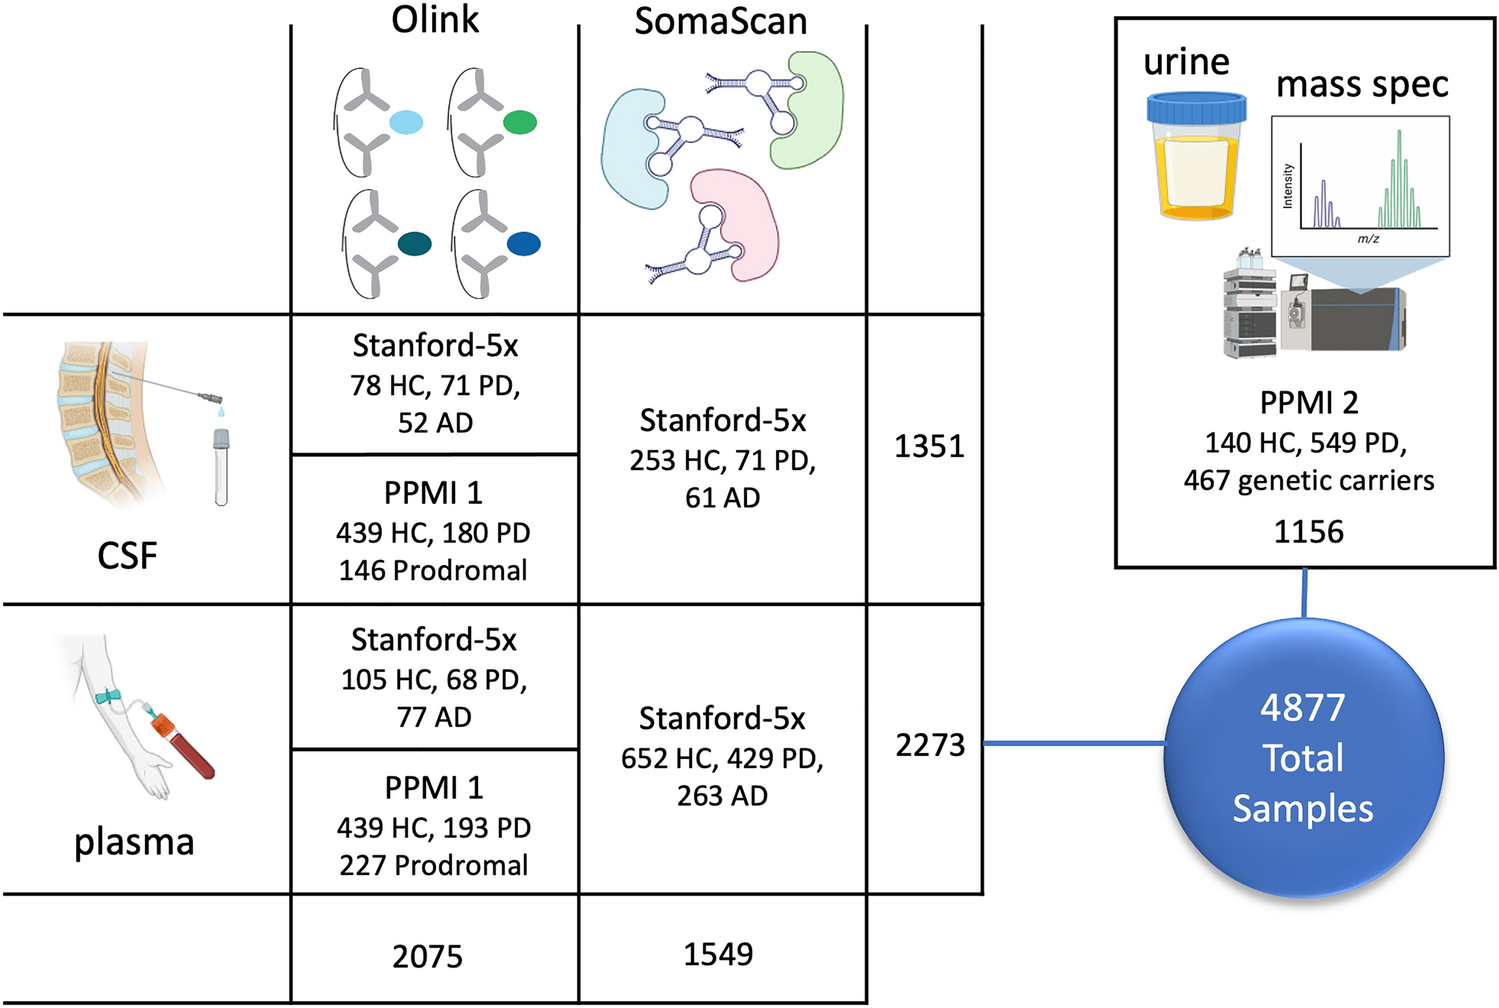 Comprehensive proteomics of CSF, plasma, and urine identify DDC and other biomarkers of early Parkinson’s disease